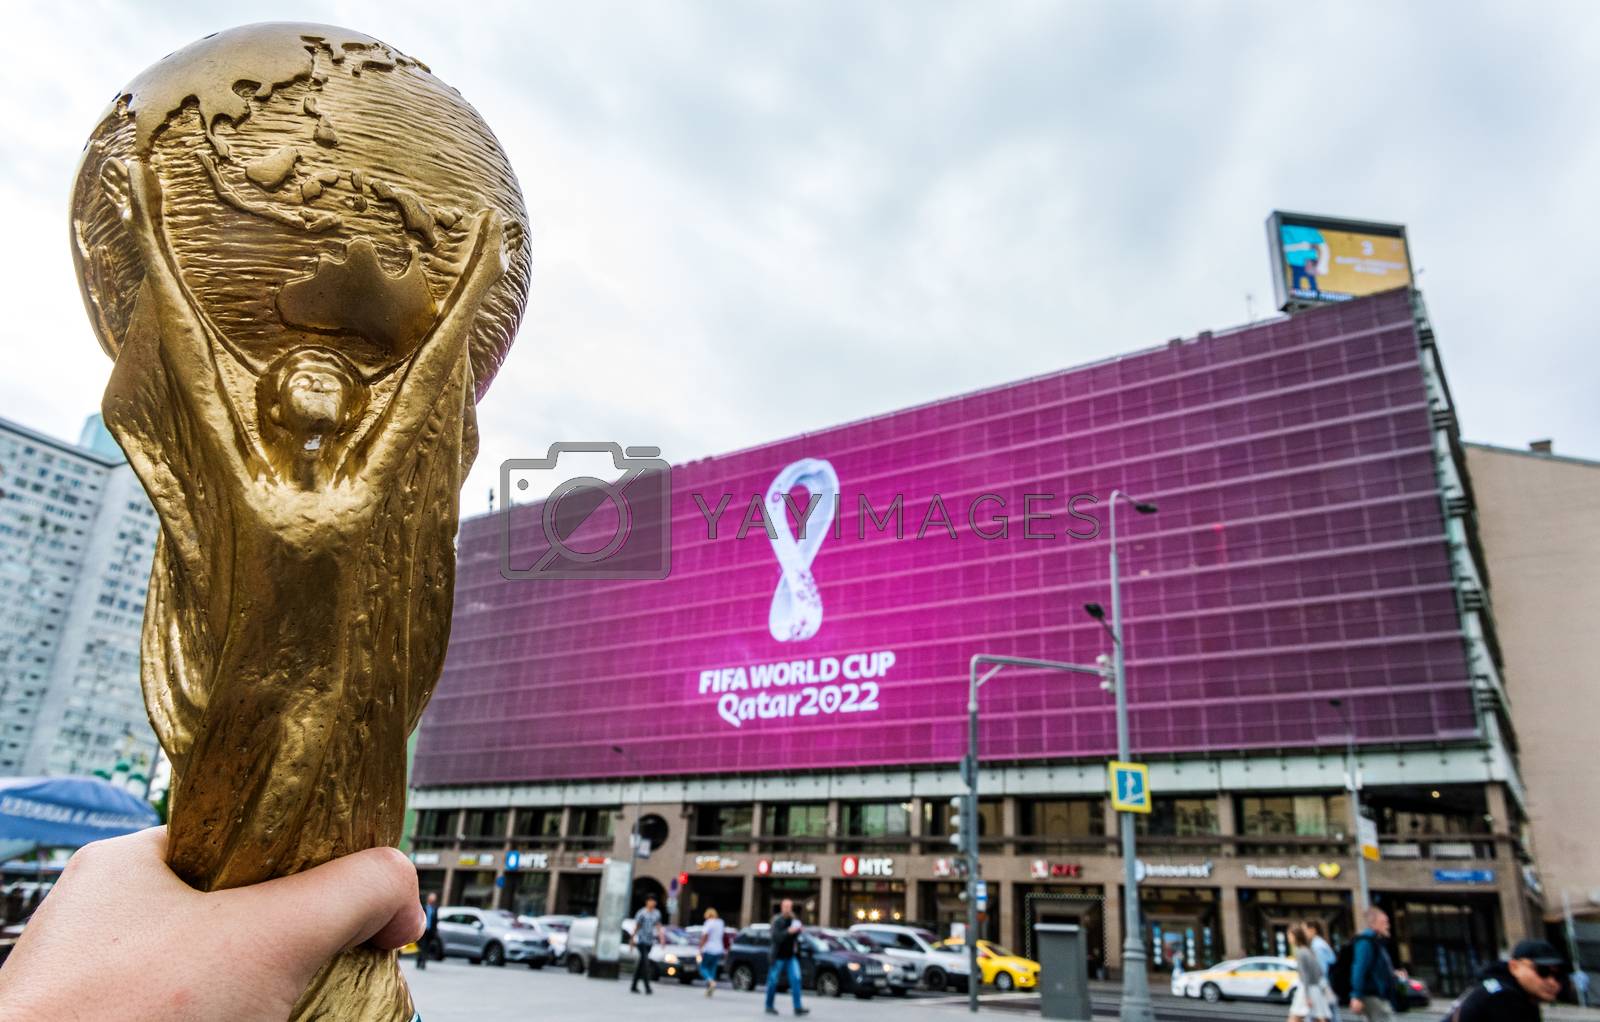 Royalty free image of World cup trophy by fifg